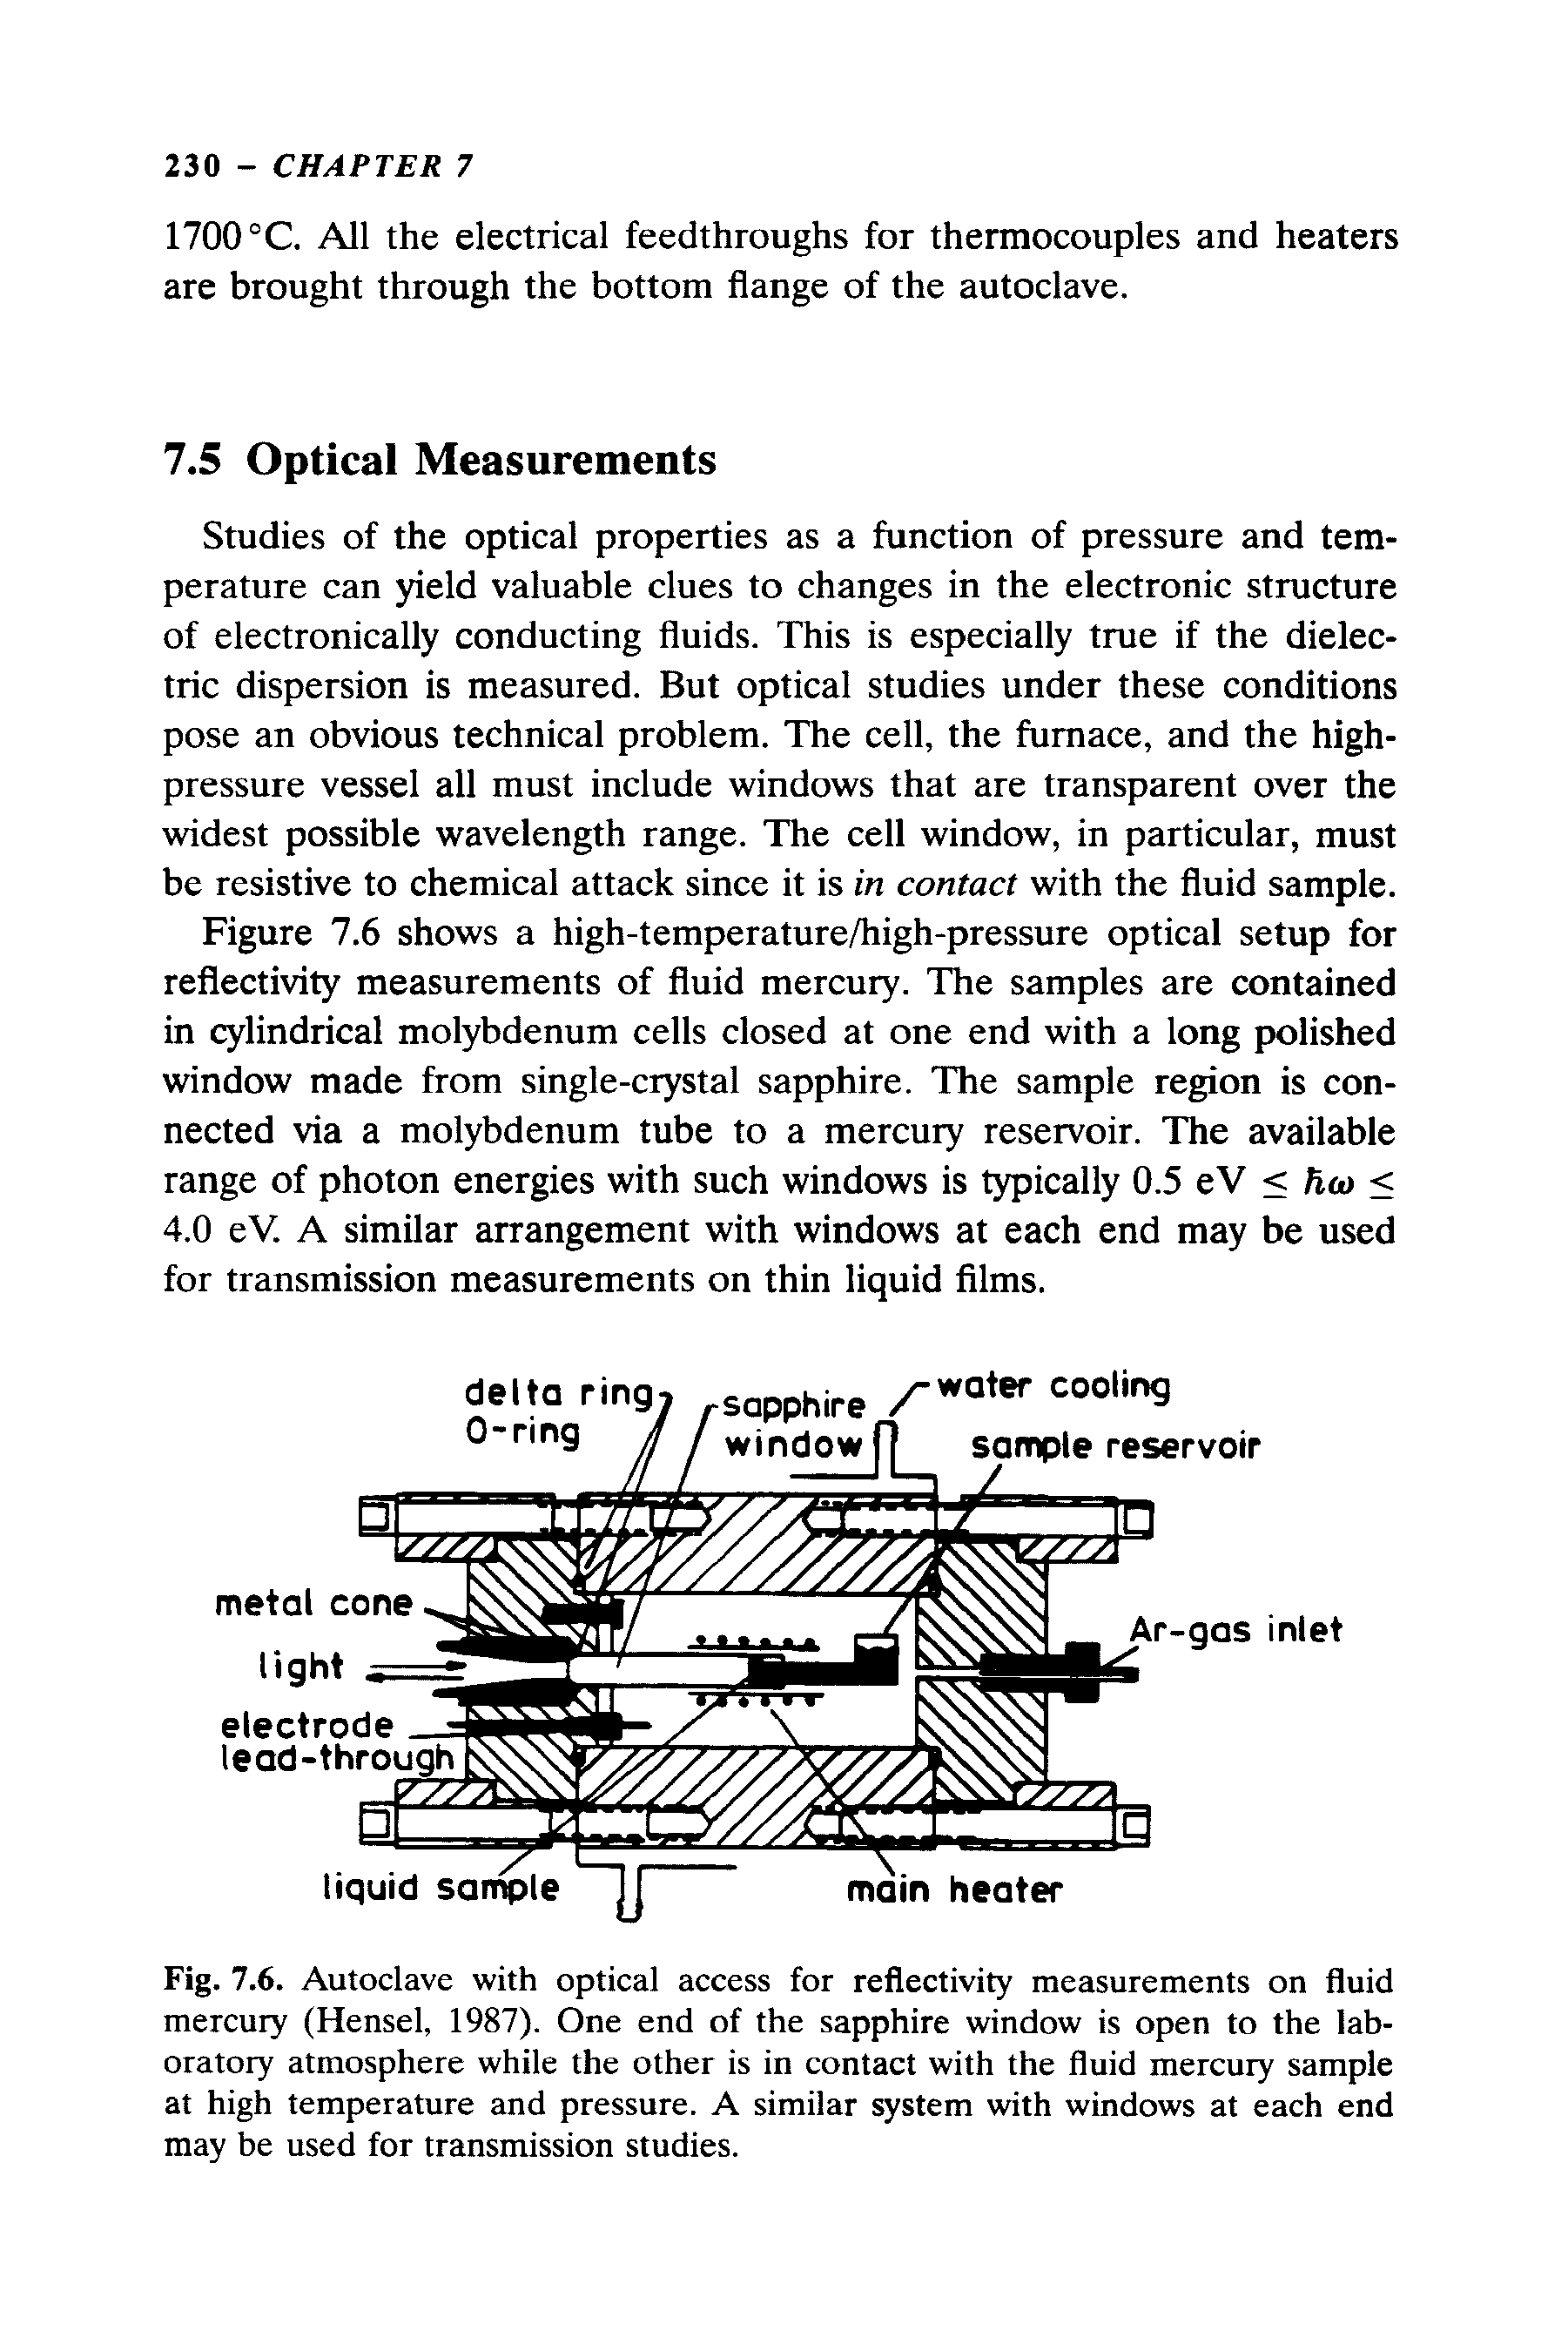 Fig. 7.6. Autoclave with optical access for reflectivity measurements on fluid mercury (Hensel, 1987). One end of the sapphire window is open to the laboratory atmosphere while the other is in contact with the fluid mercury sample at high temperature and pressure. A similar system with windows at each end may be used for transmission studies.